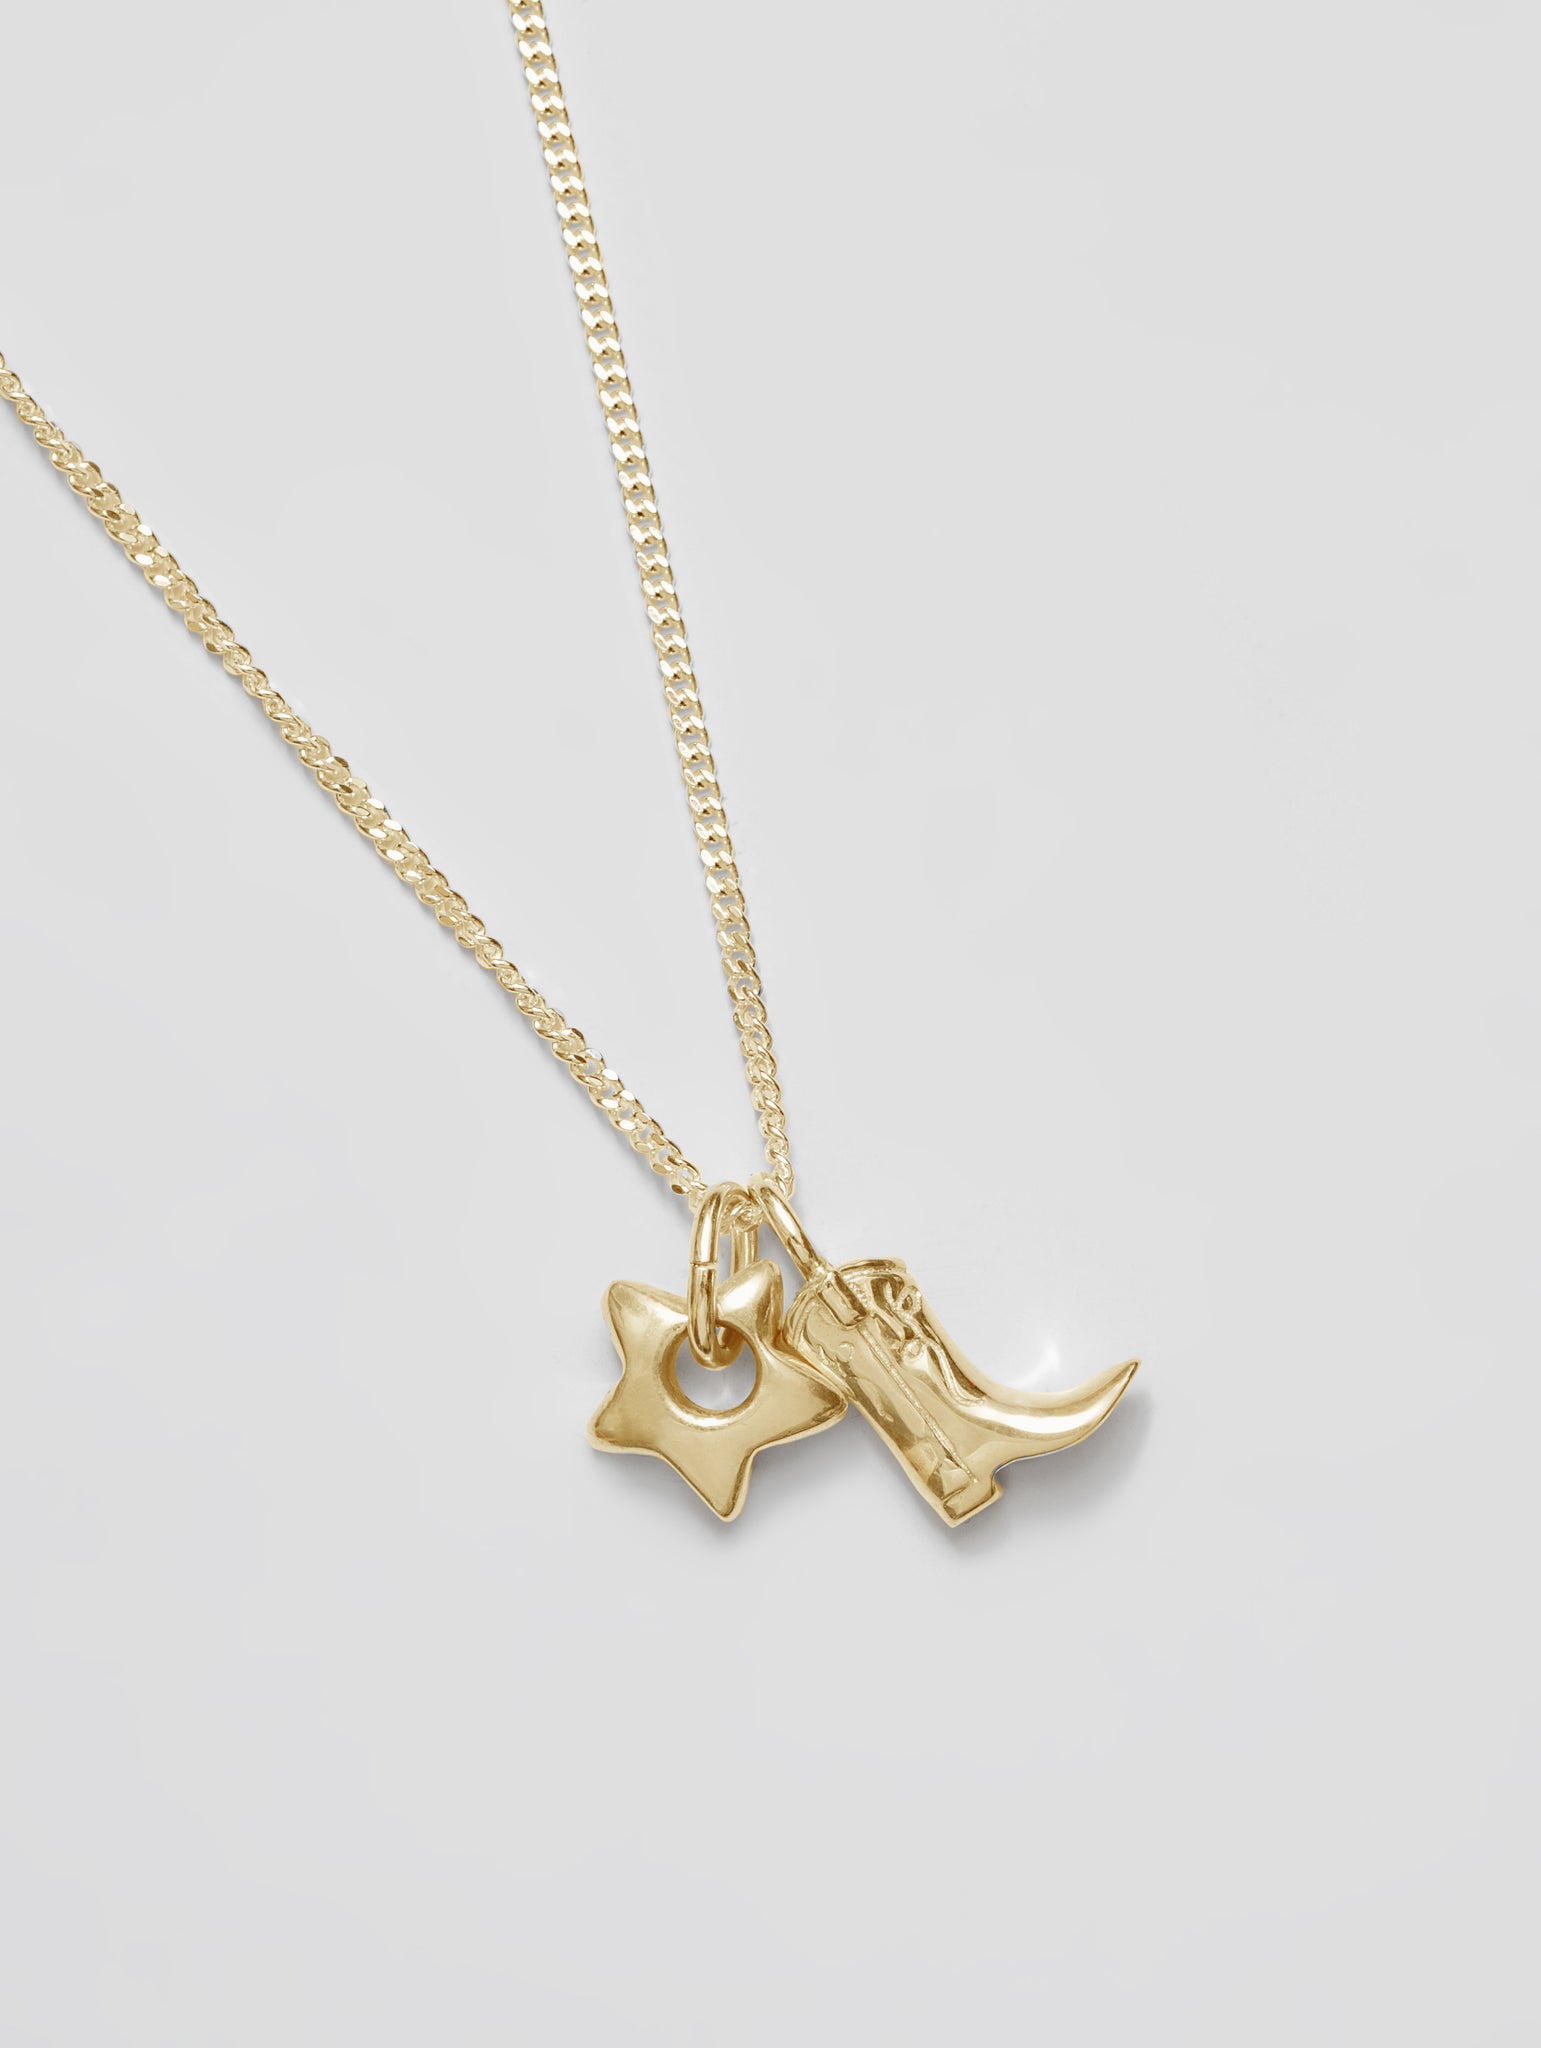 Mini Cowboy Boot and Star Charm Necklace in Gold